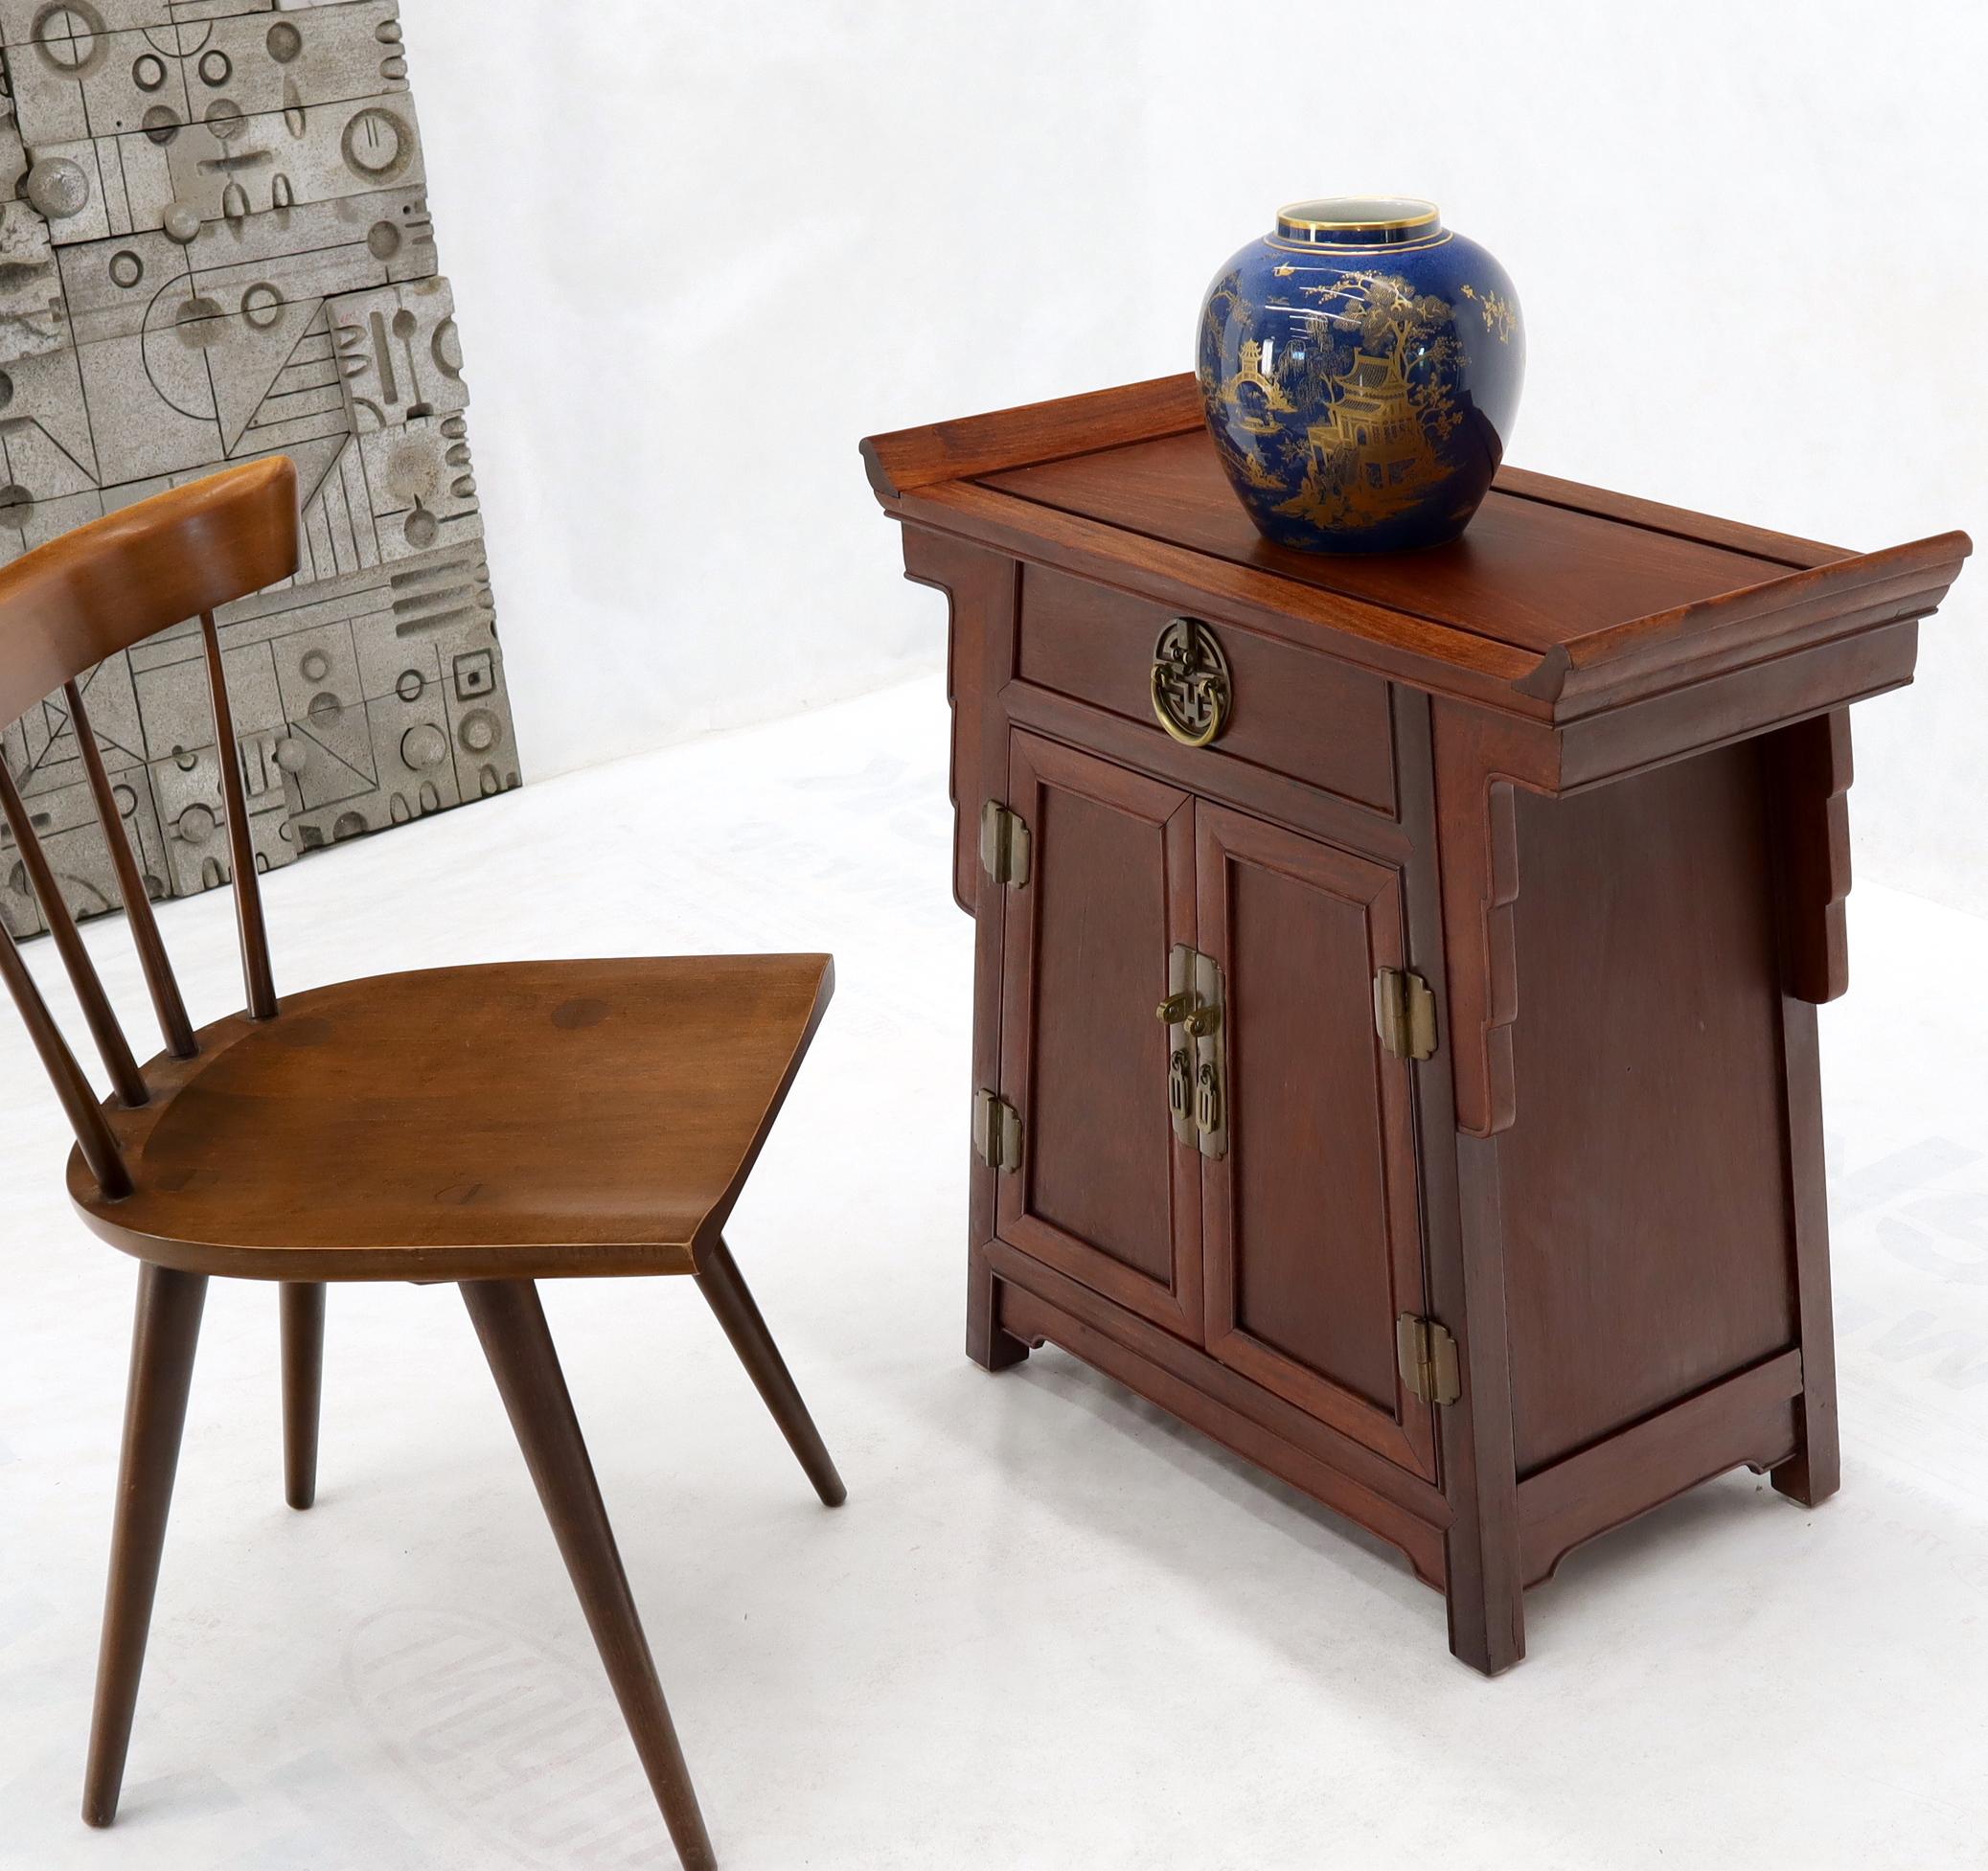 Pair of Asian modern two doors one drawer end tables nightstands with brass hardware. High quality craftsmanship solid wood cabinets. NYC area delivery starts from $150.
 